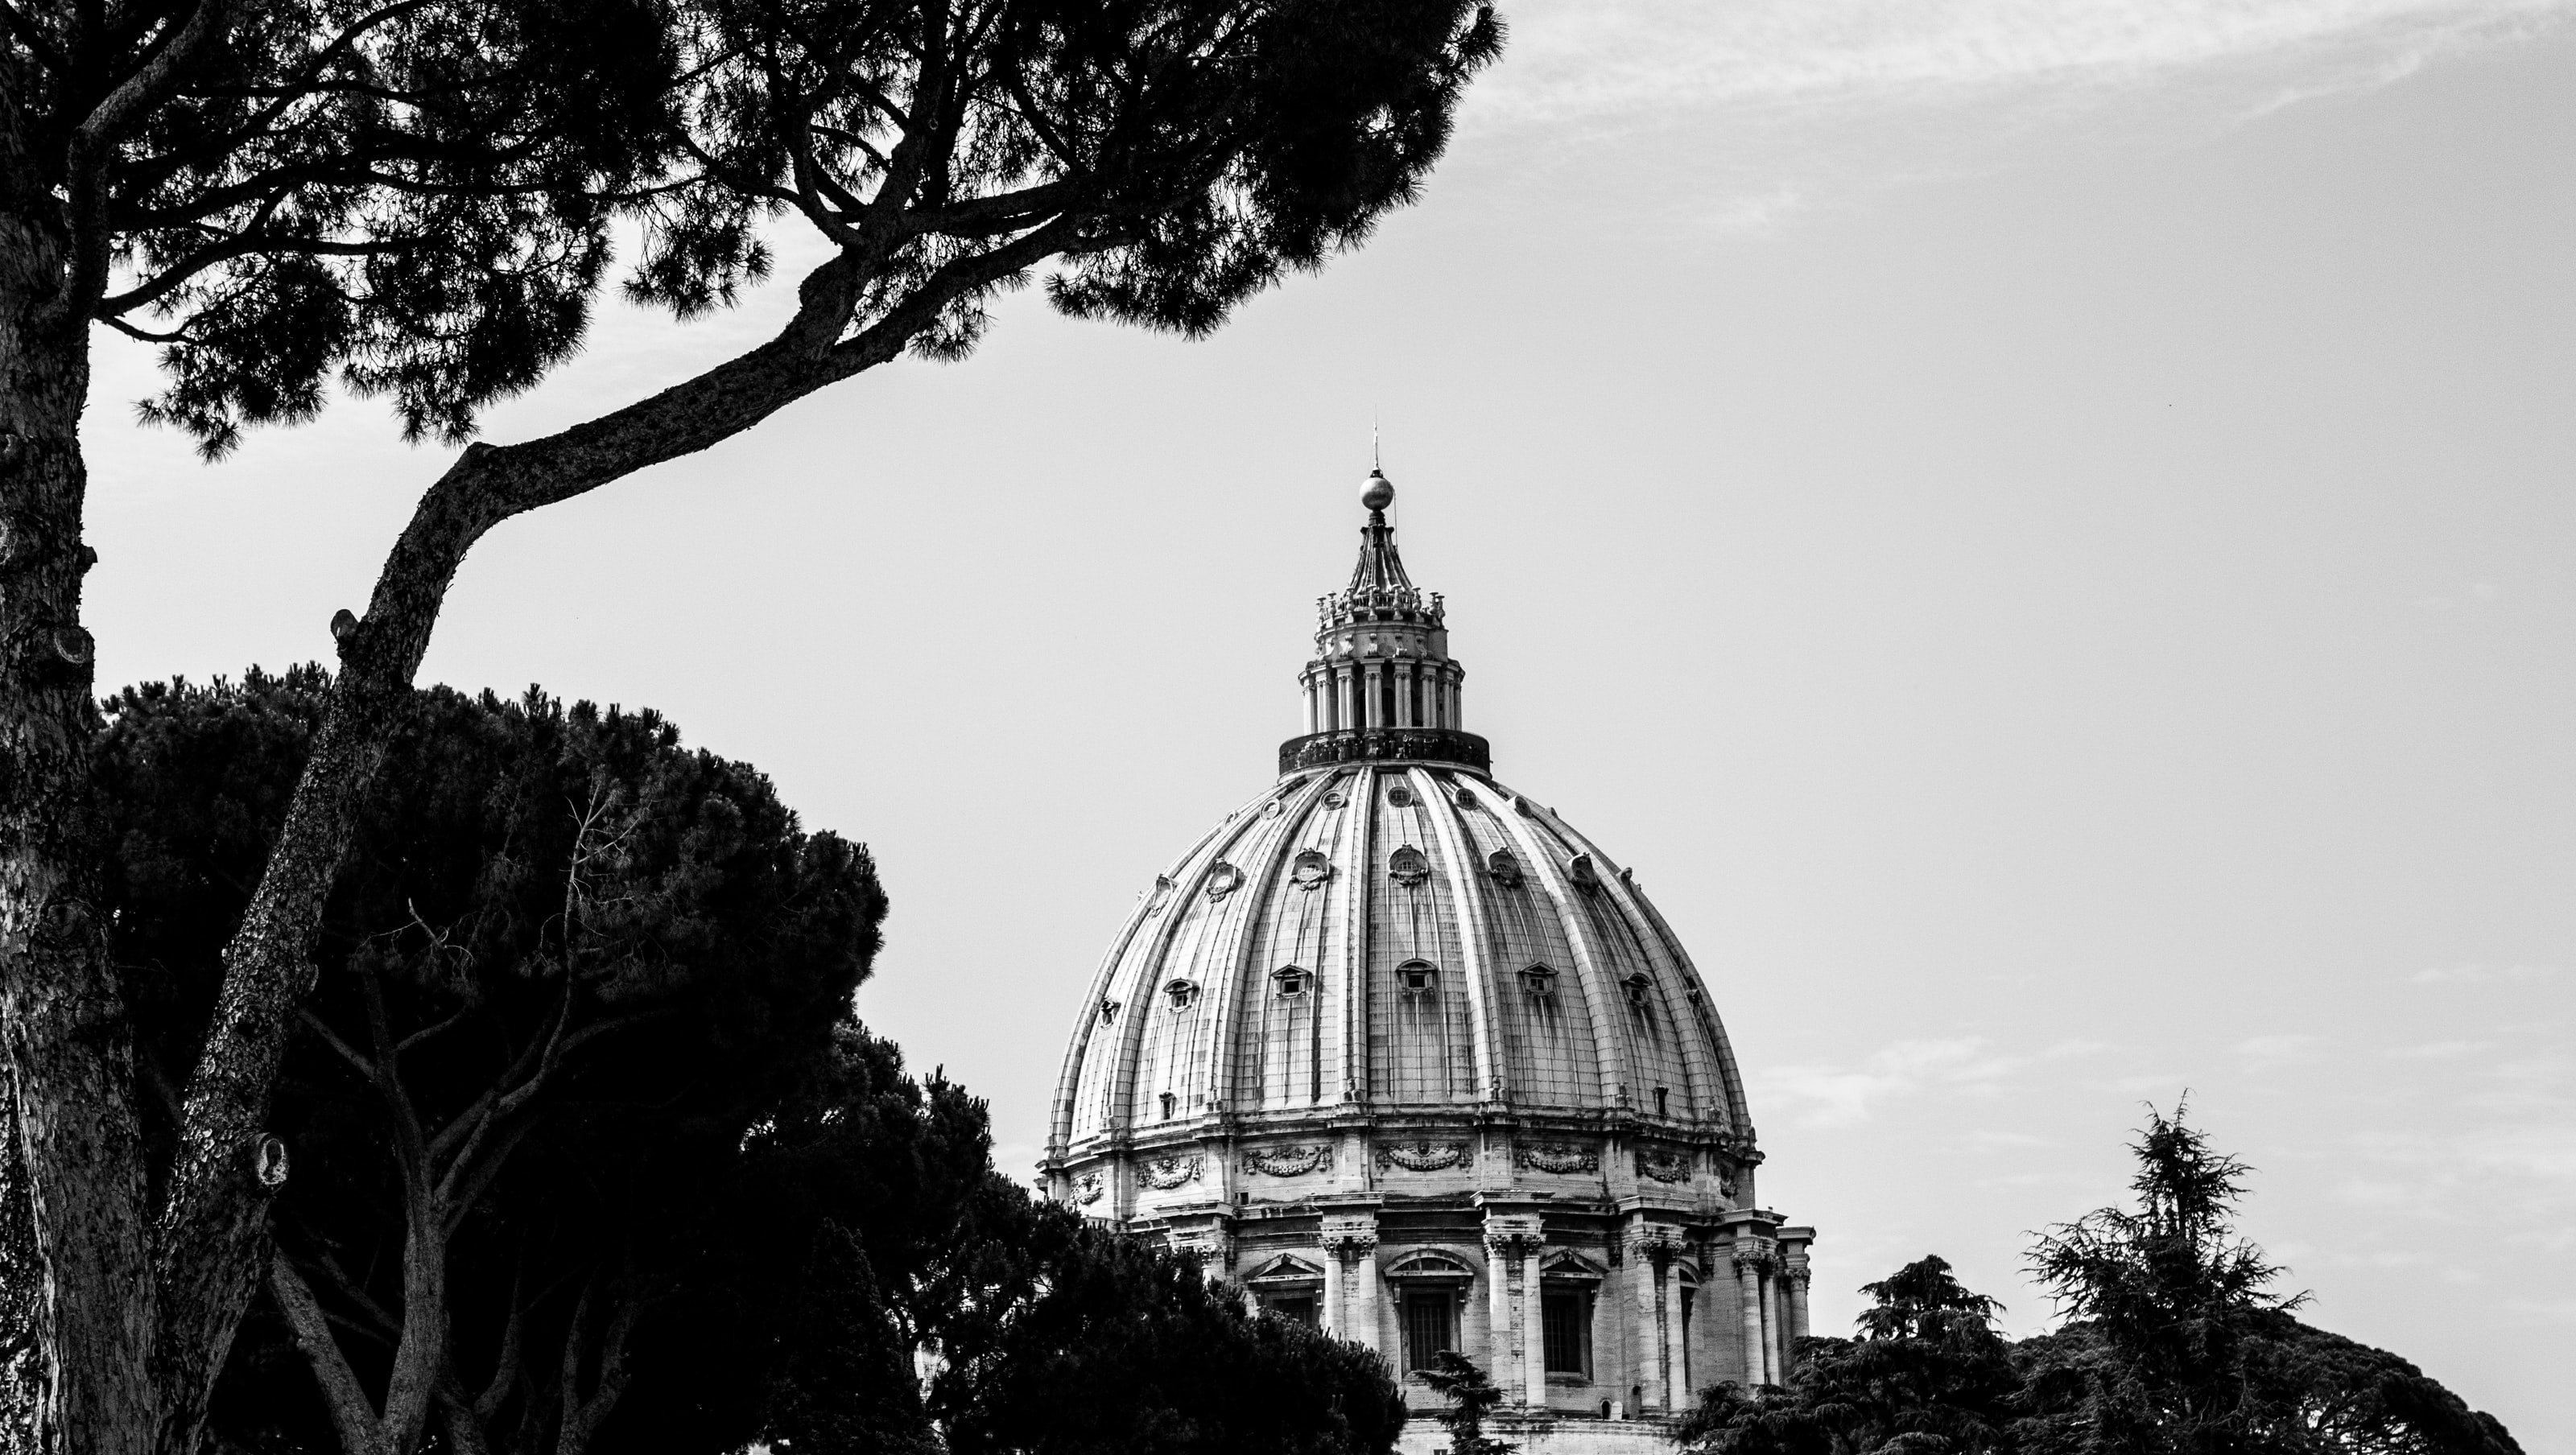 A black and white photo of St. Peter's Basilica, viewed from a distance through some trees